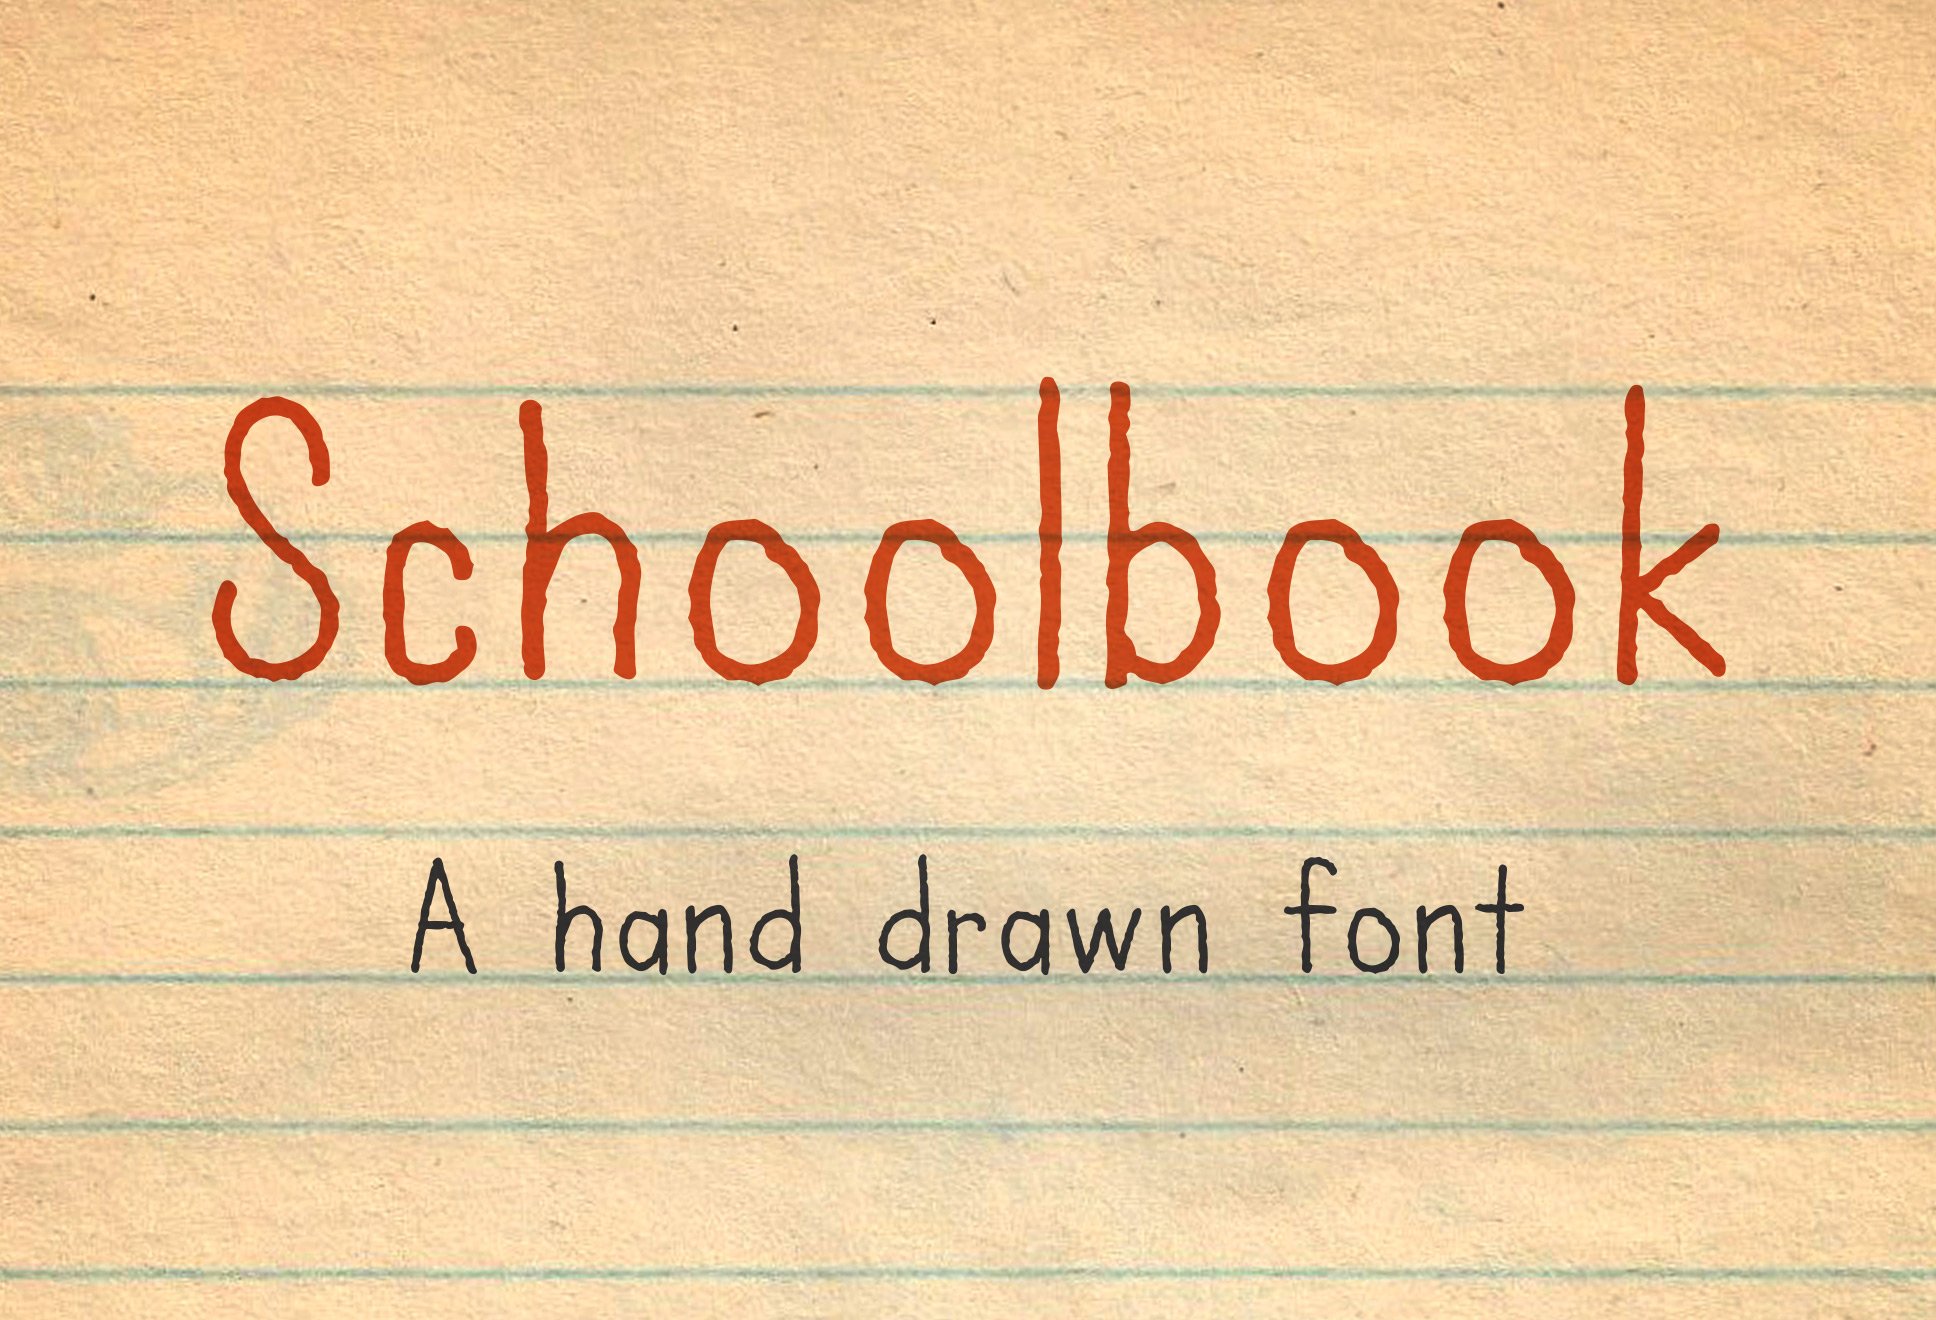 Schoolbook — A hand drawn font cover image.